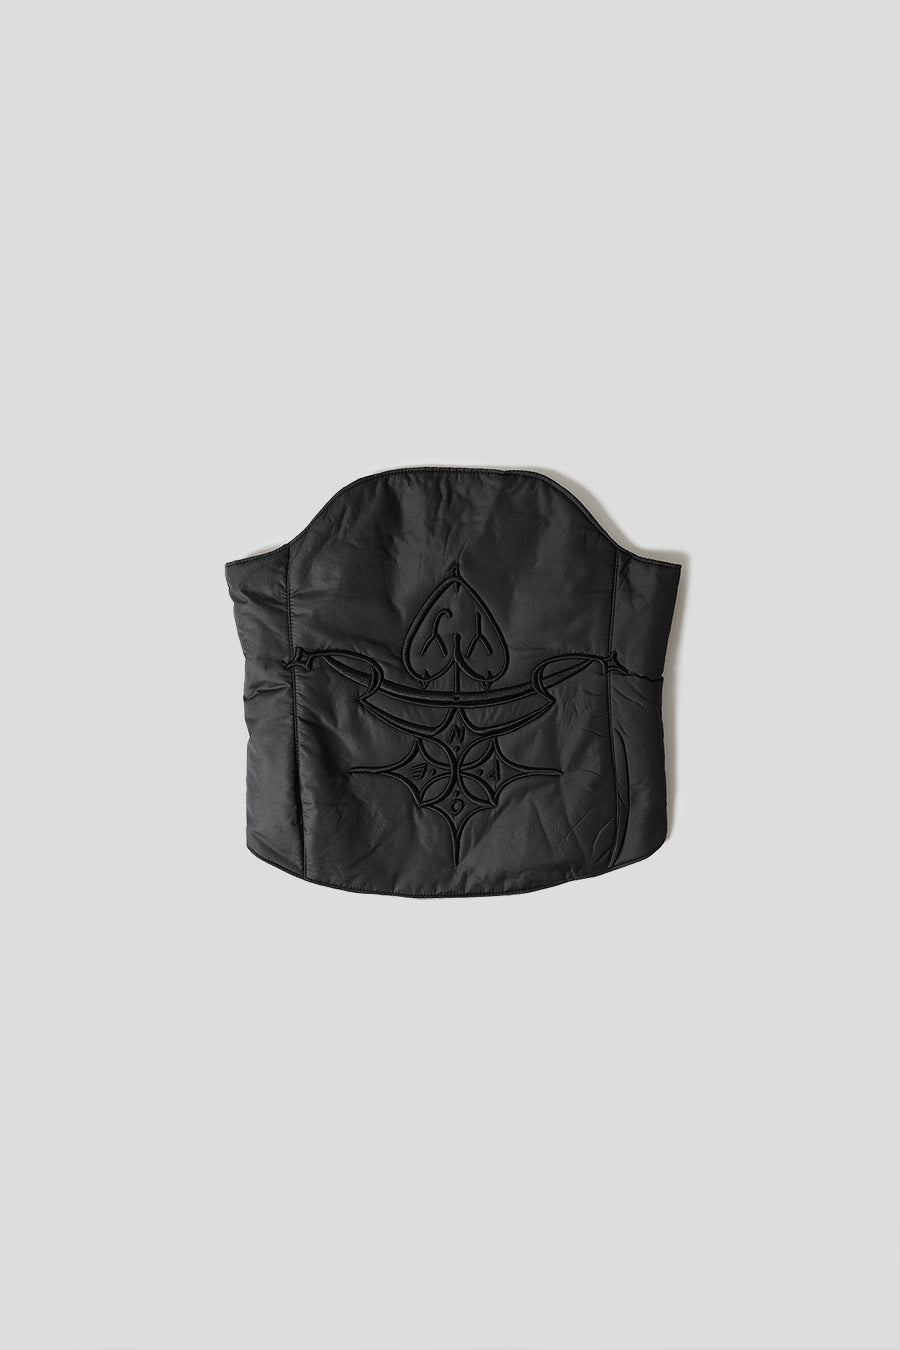 Open YY - QUILTED BUSTIER WITH BLACK EMBLEM - LE LABO STORE